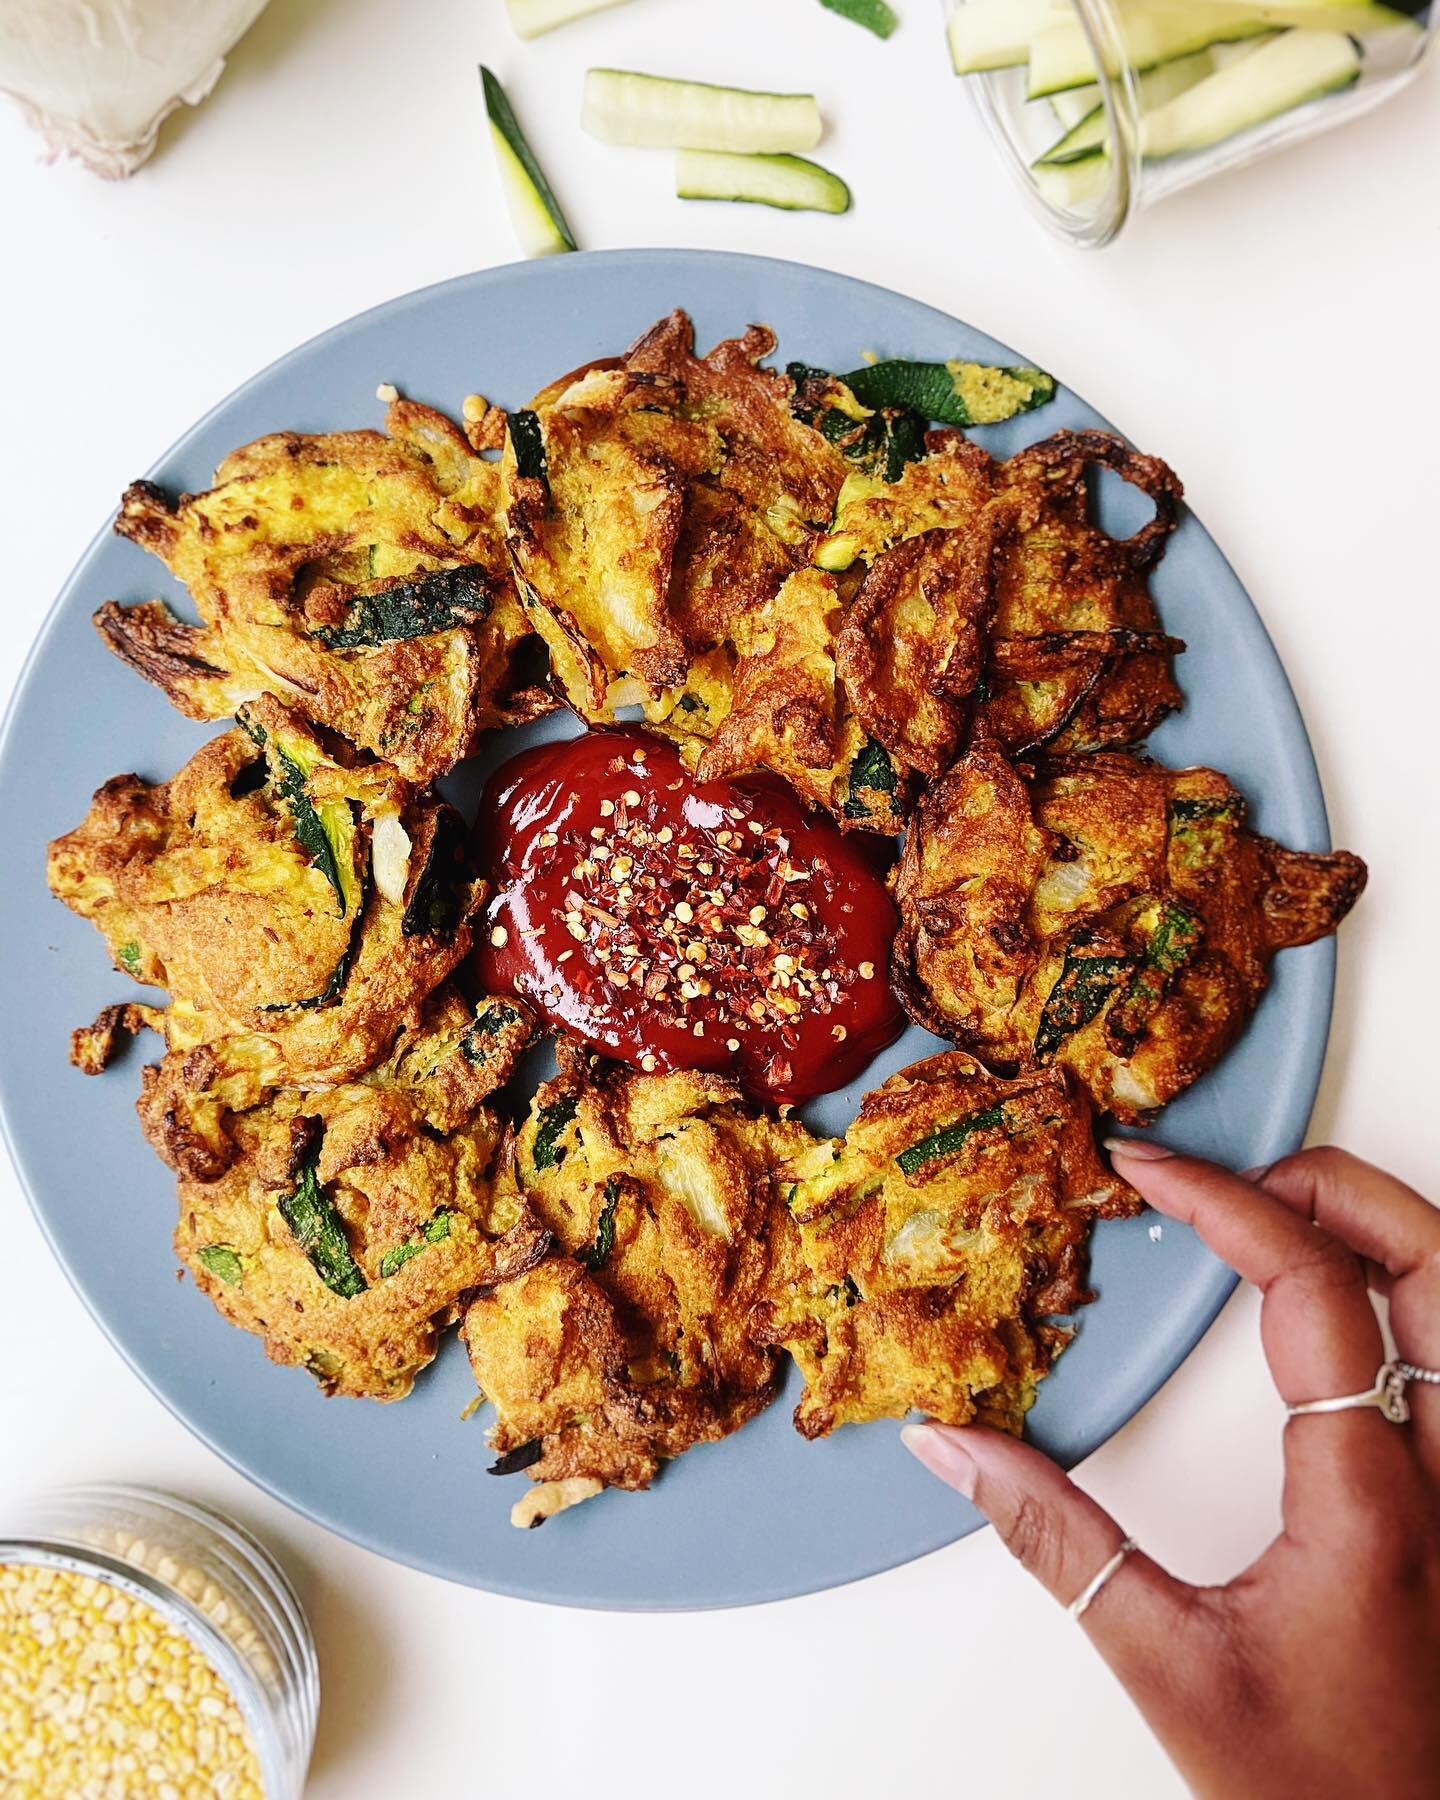 NEW on the blog is the recipe for these ✨Air Fryer Zucchini &amp; Onion Pakoras✨ I made on @janeunchainednews&rsquo; LunchBreakLIVE last week! Pakoras are a favorite snack across many South Asian cuisines &amp; they are naturally plant-based! The tra